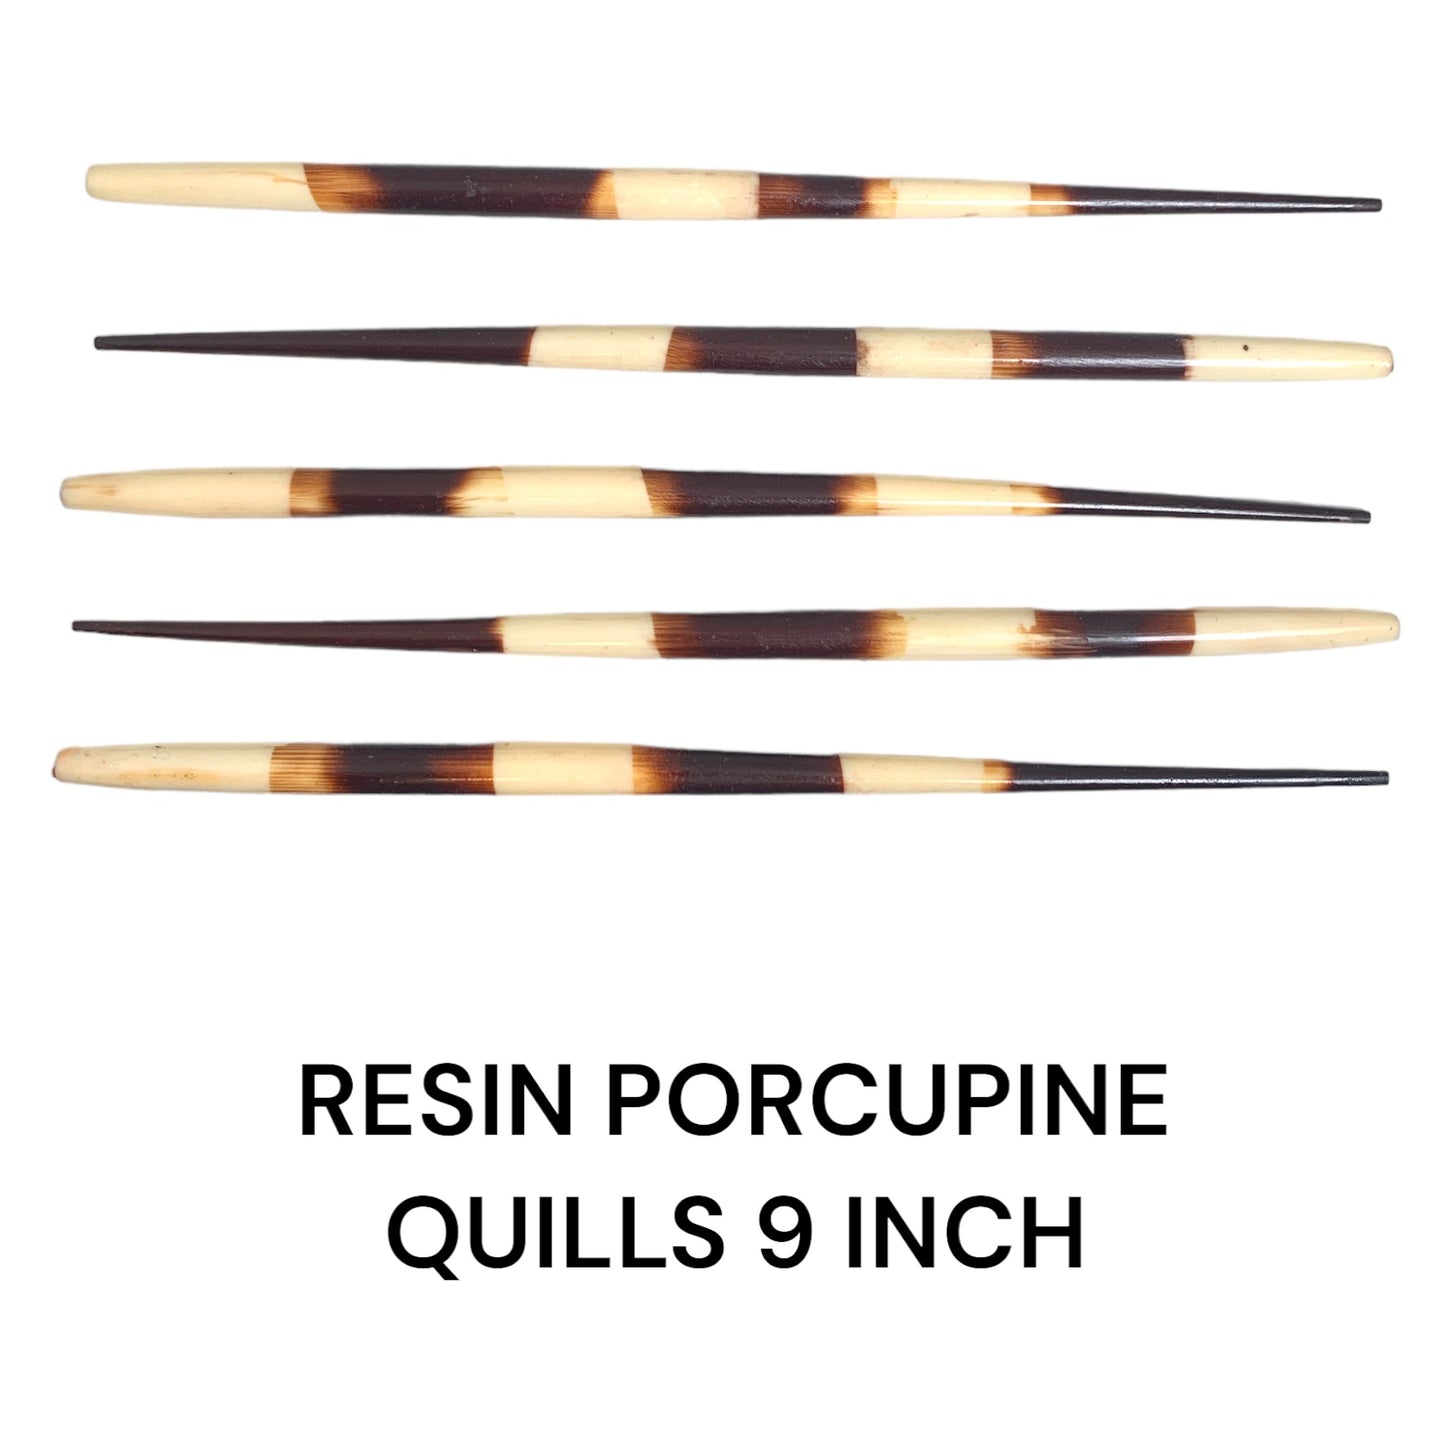 9 inch Resin Porcupine Quill - Premium Quality - Made in India - NEW523